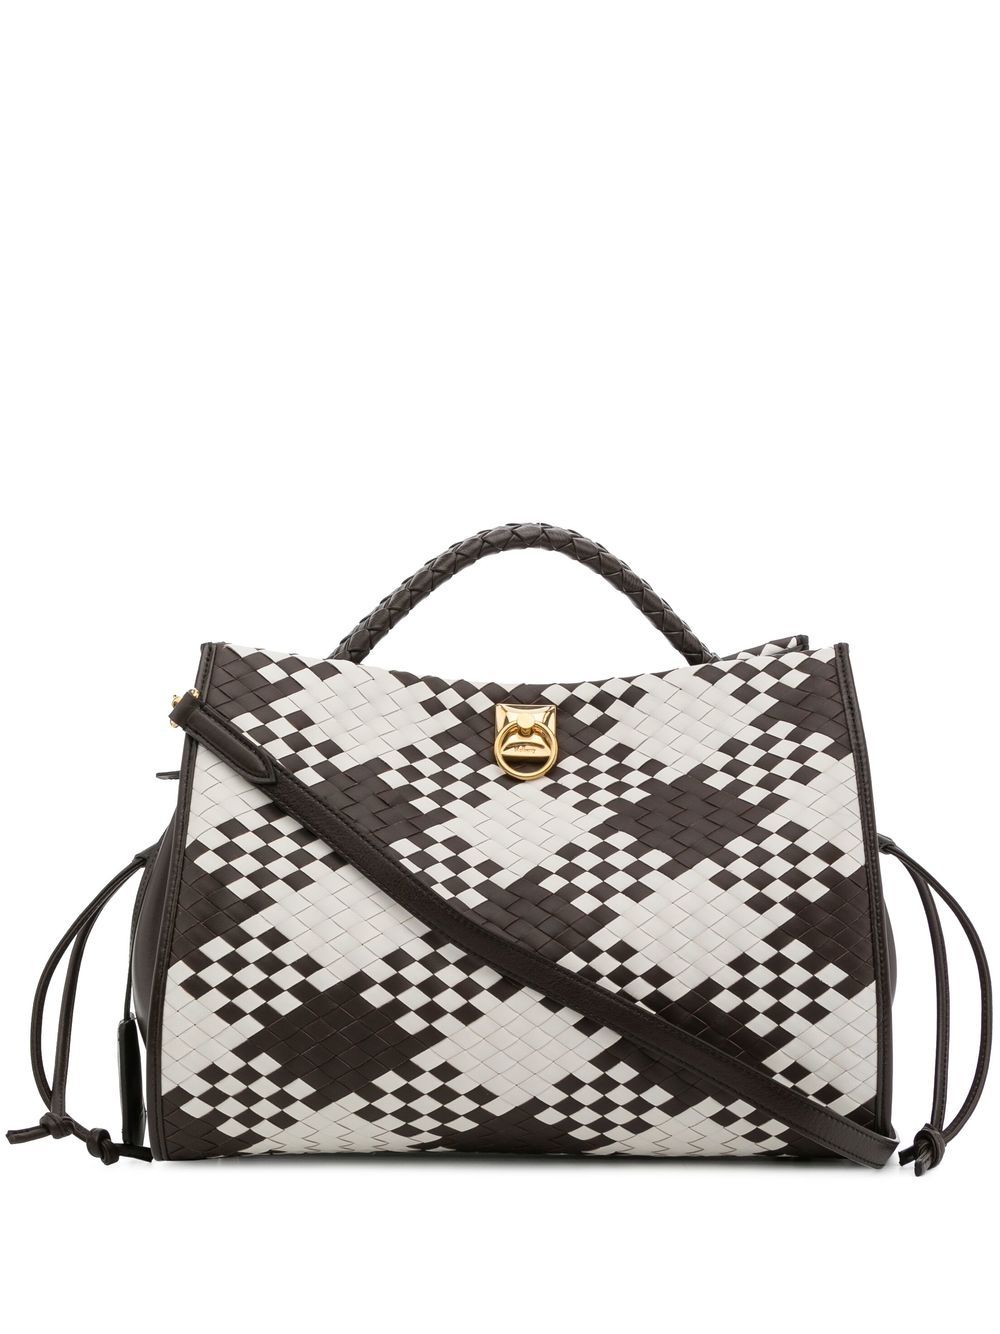 Mulberry Iris Woven Leather Tote Bag - Farfetch